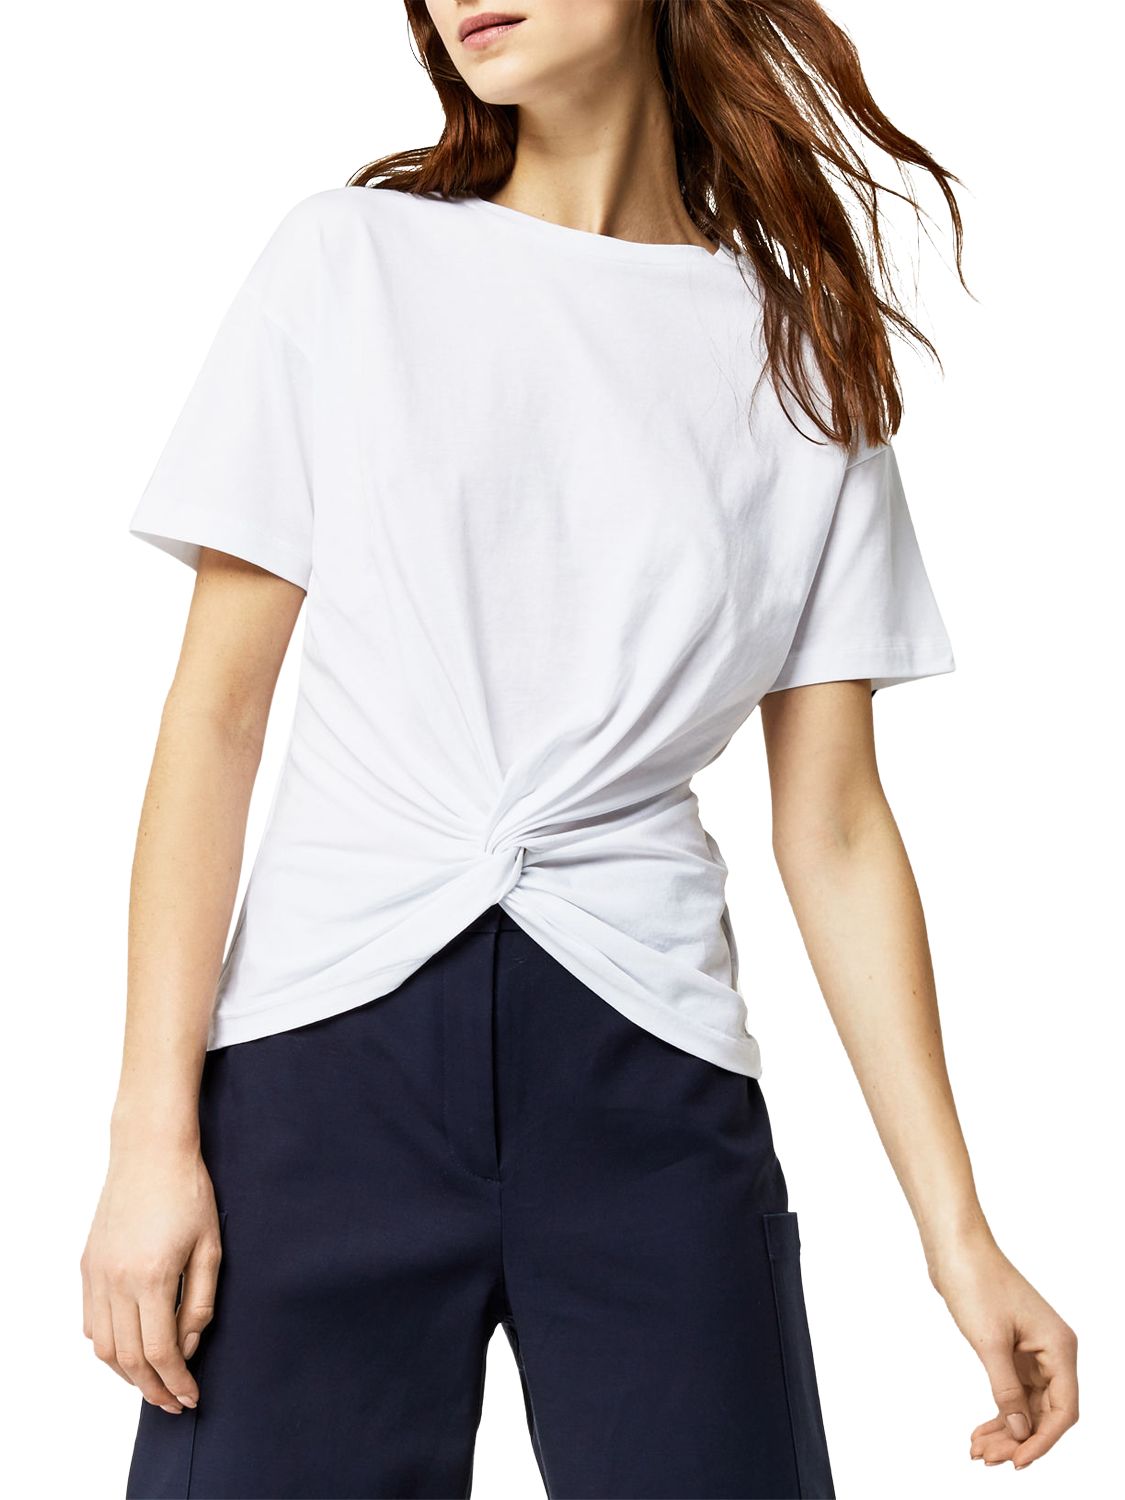 Knot Shirt / Oversized Knot Shirt White | na-kd.com / This technique can make your outfit look more put together!